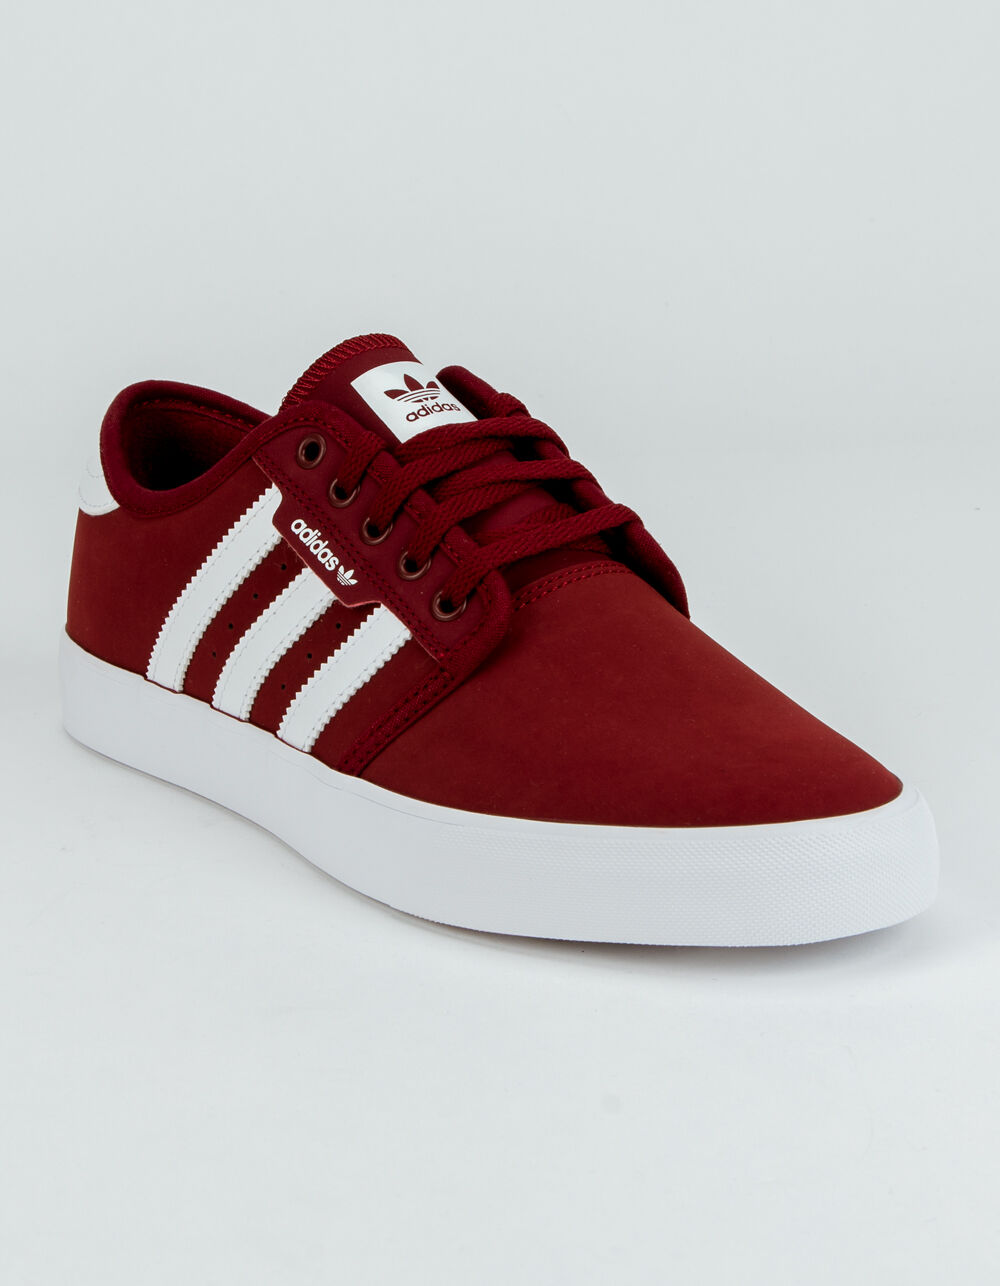 ADIDAS Seeley Collegiate Burgundy & Future White Shoes image number 0